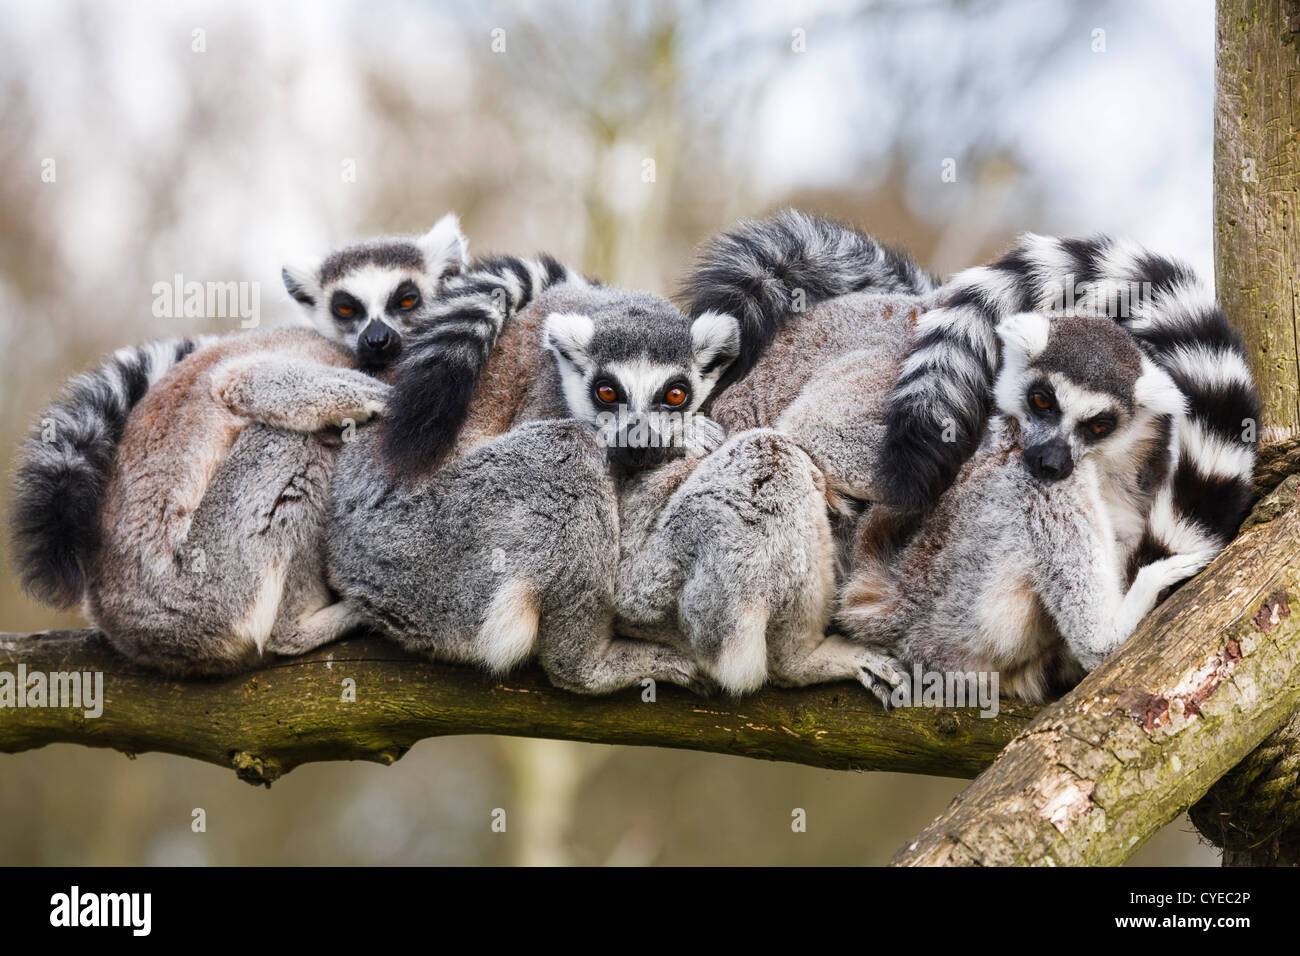 A family of ring-tailed Madagascan lemurs cuddle up in a zoo enclosure Stock Photo